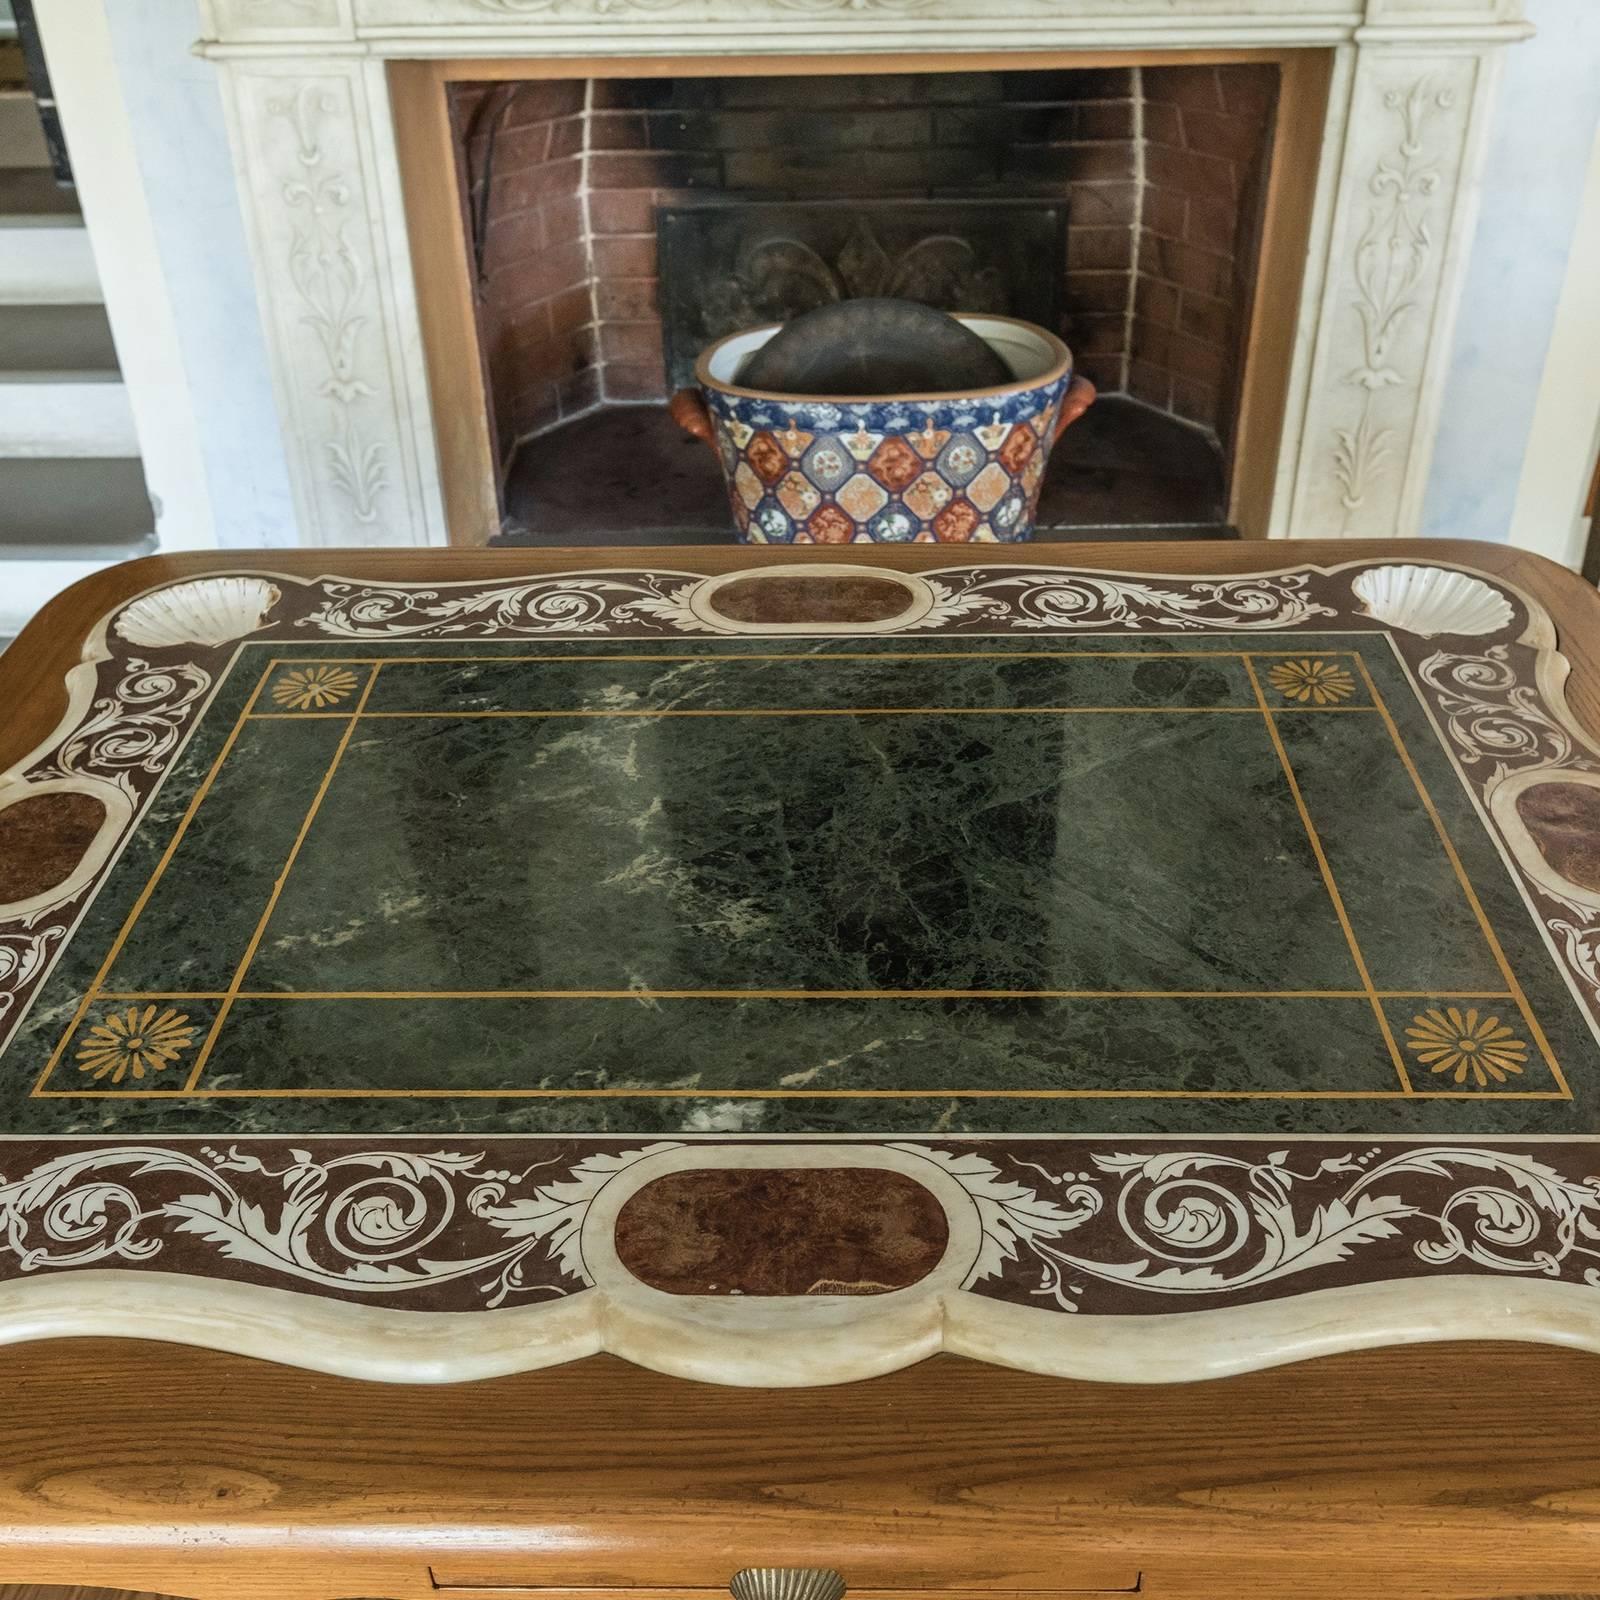 A superb addition to a Classic or eclectic home, this table is designed to accompany evenings playing cards and entertaining in style. Resting on four Baroque-inspired legs that elegantly curve to meet the rectangular top, the standout feature of